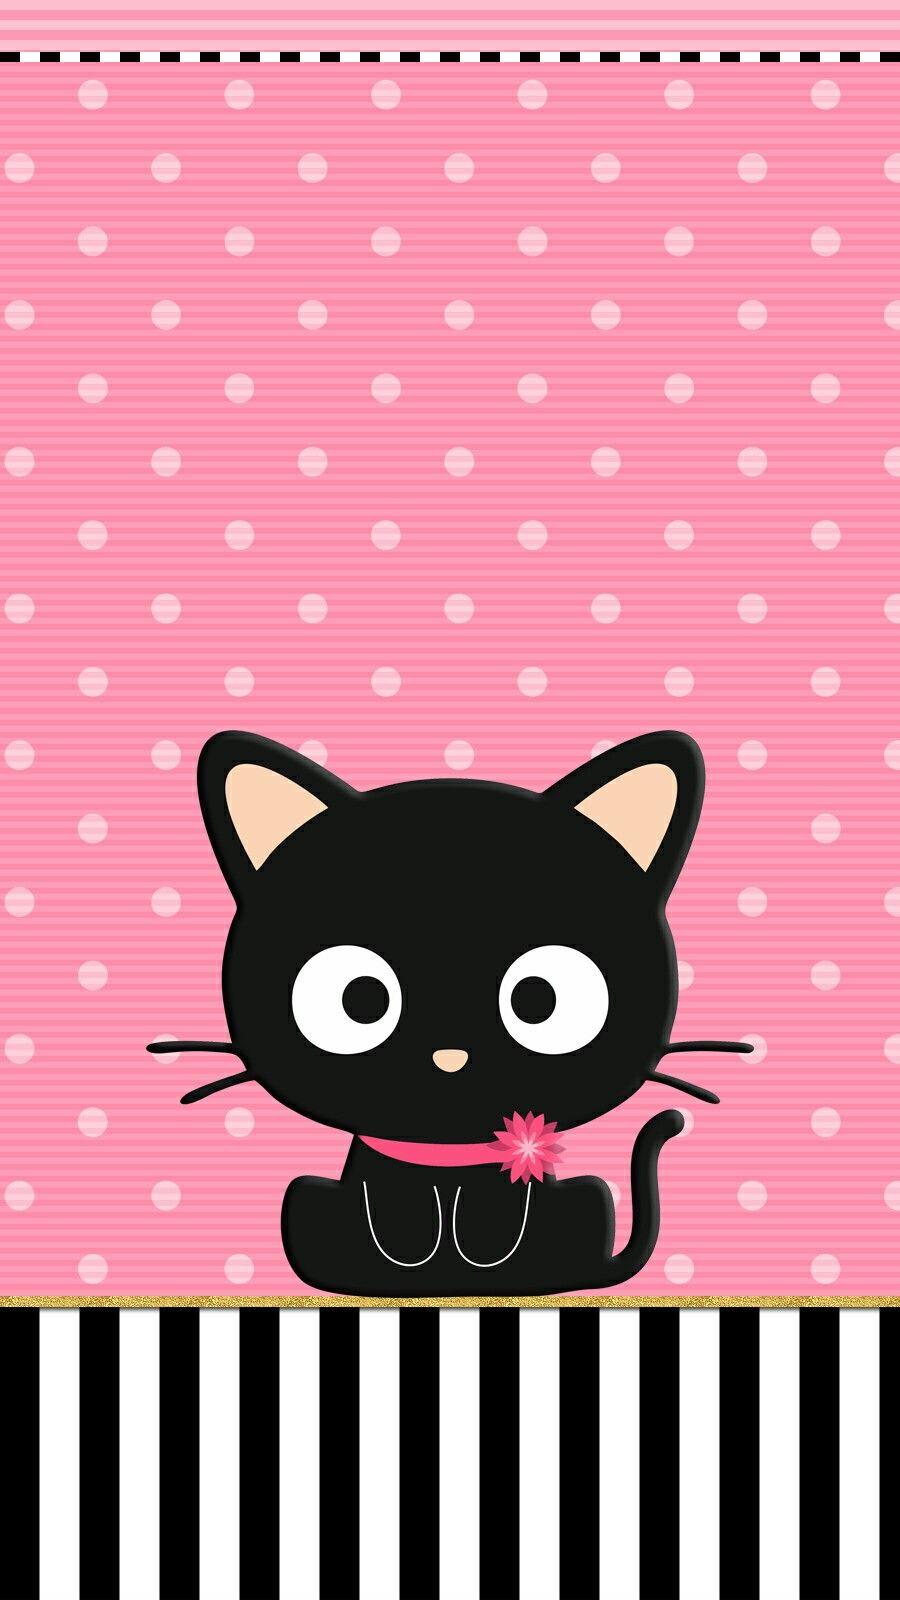 chococat #wallpaper #iphone #pink. Cute walls by me♡